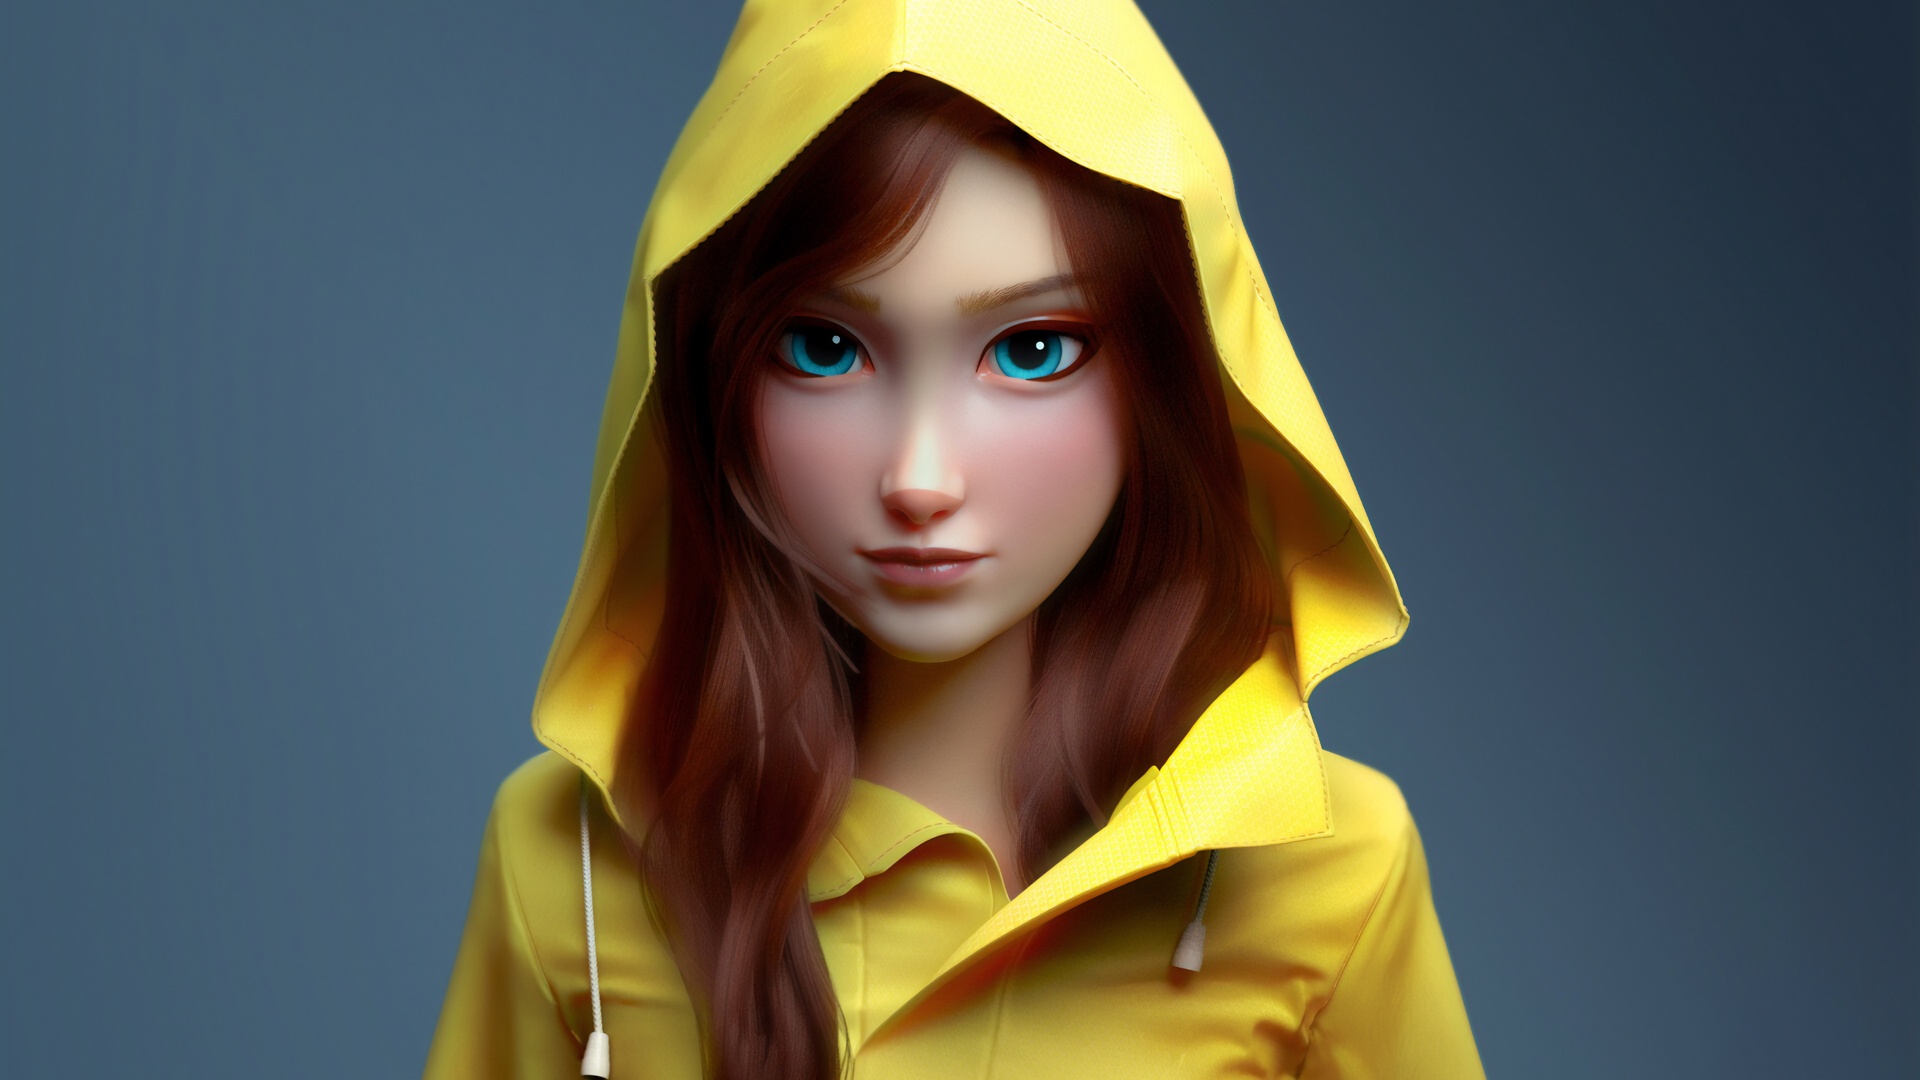 1920x1080 3d Cgi Girl Art Laptop Full HD 1080P HD 4k Wallpapers, Images,  Backgrounds, Photos and Pictures